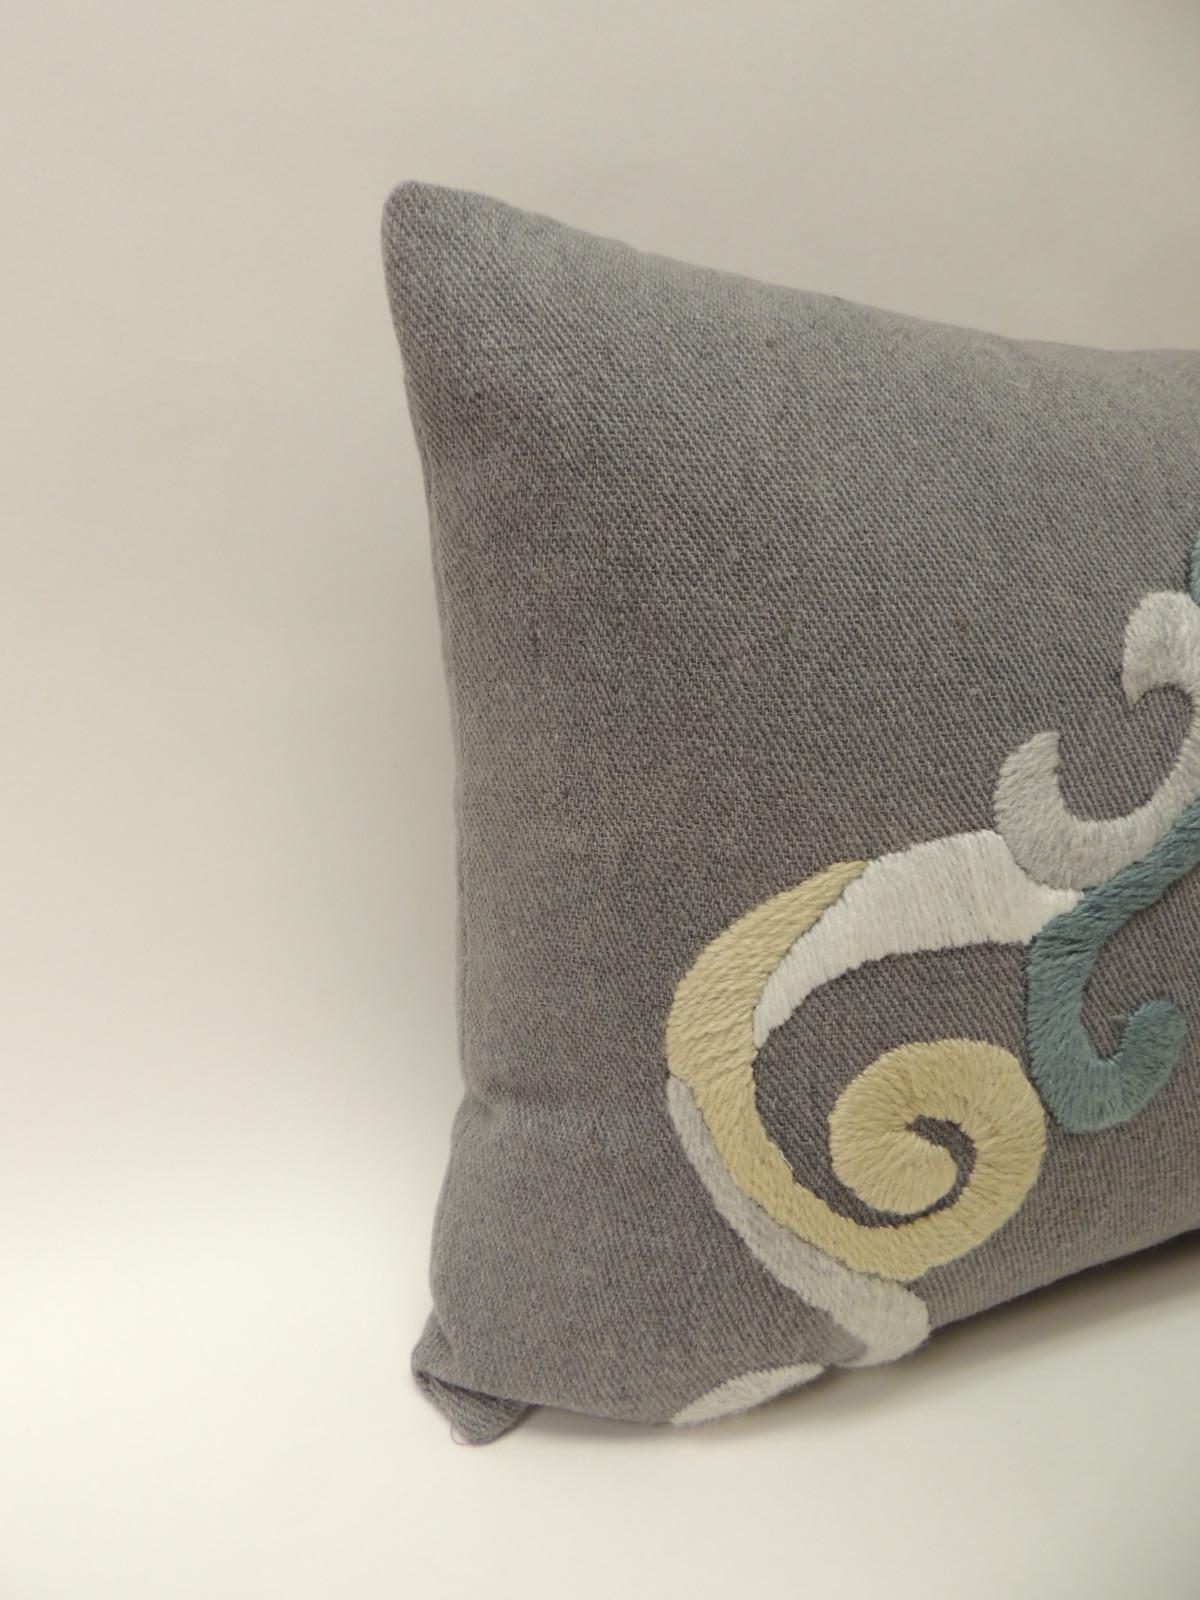 This item is part of our 7Th Anniversary SALE:
Vintage Mid-Century Modern embroidery alpaca and wool woven decorative bolster pillow. Midcentury style cushion with crested style wool floss threads embroidered in the front and finished with the same